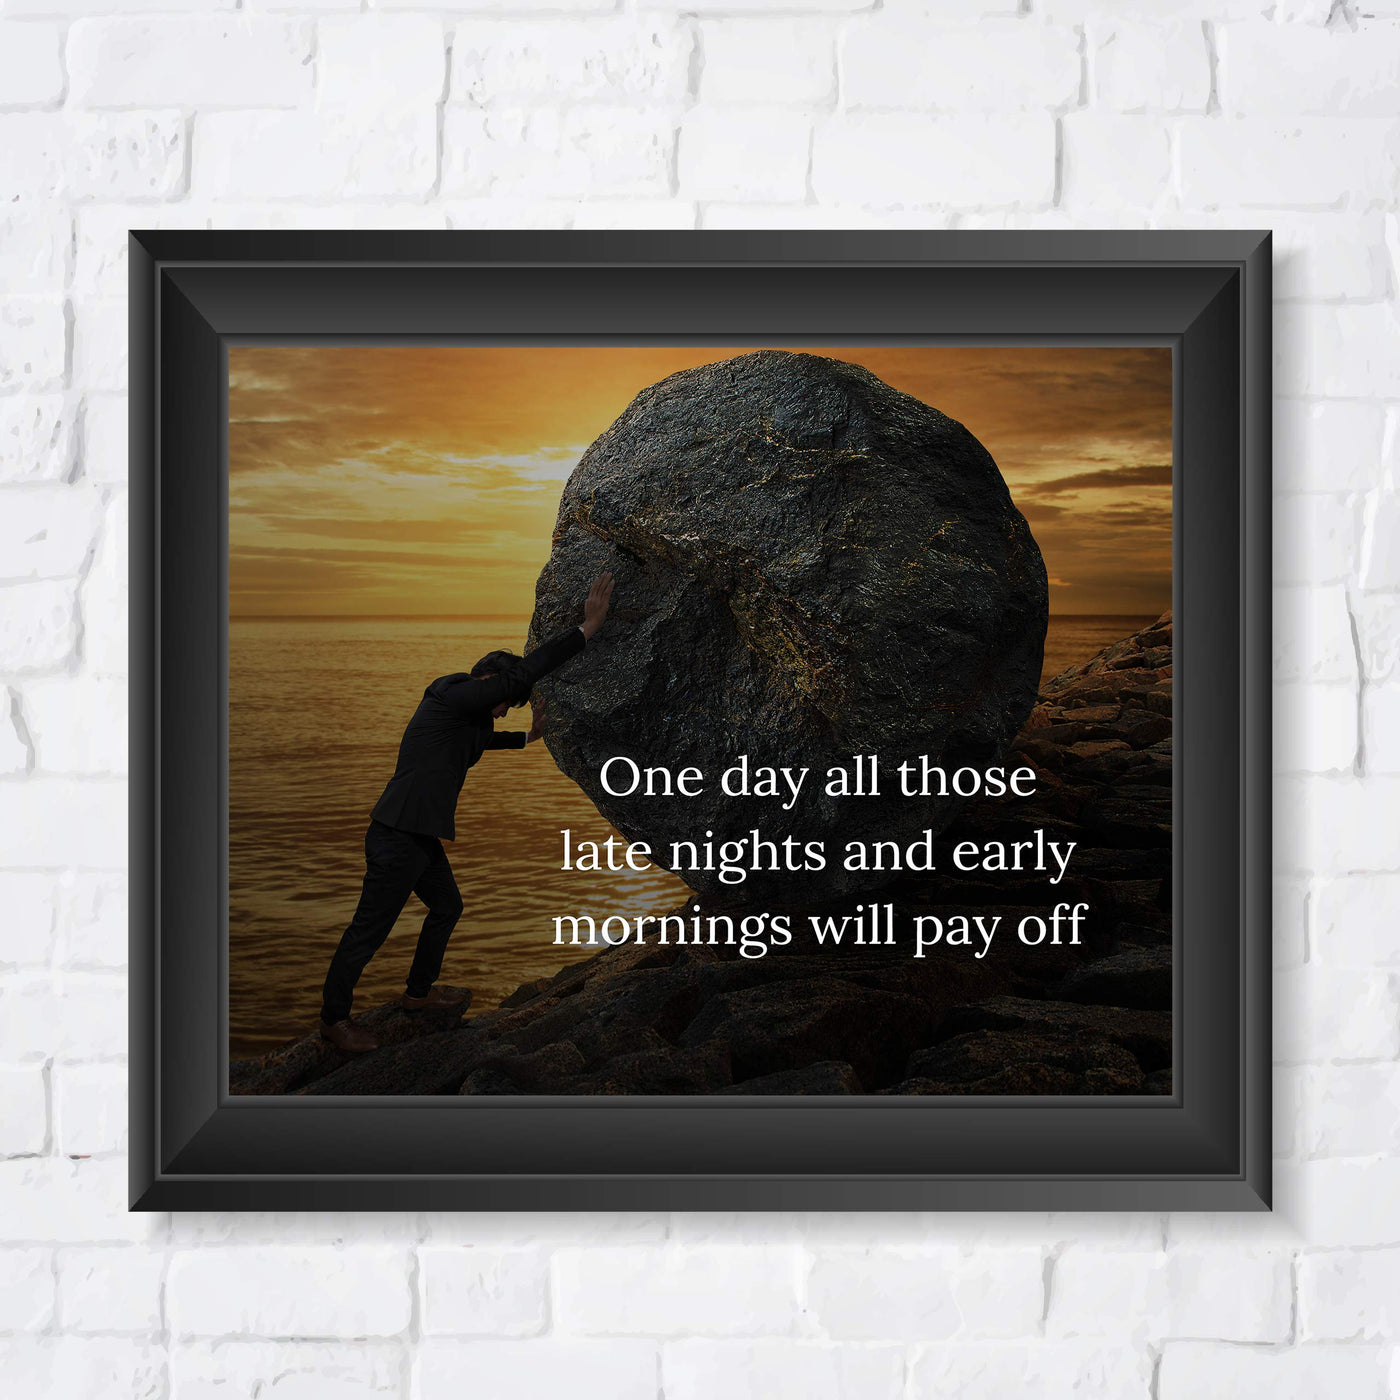 ?One Day All Those Late Nights-Early Mornings Will Pay Off? Motivational Quotes Wall Art -10 x 8" Beach Sunset Photo Print-Ready to Frame. Inspirational Home-Office-Desk-School-Business Decor.